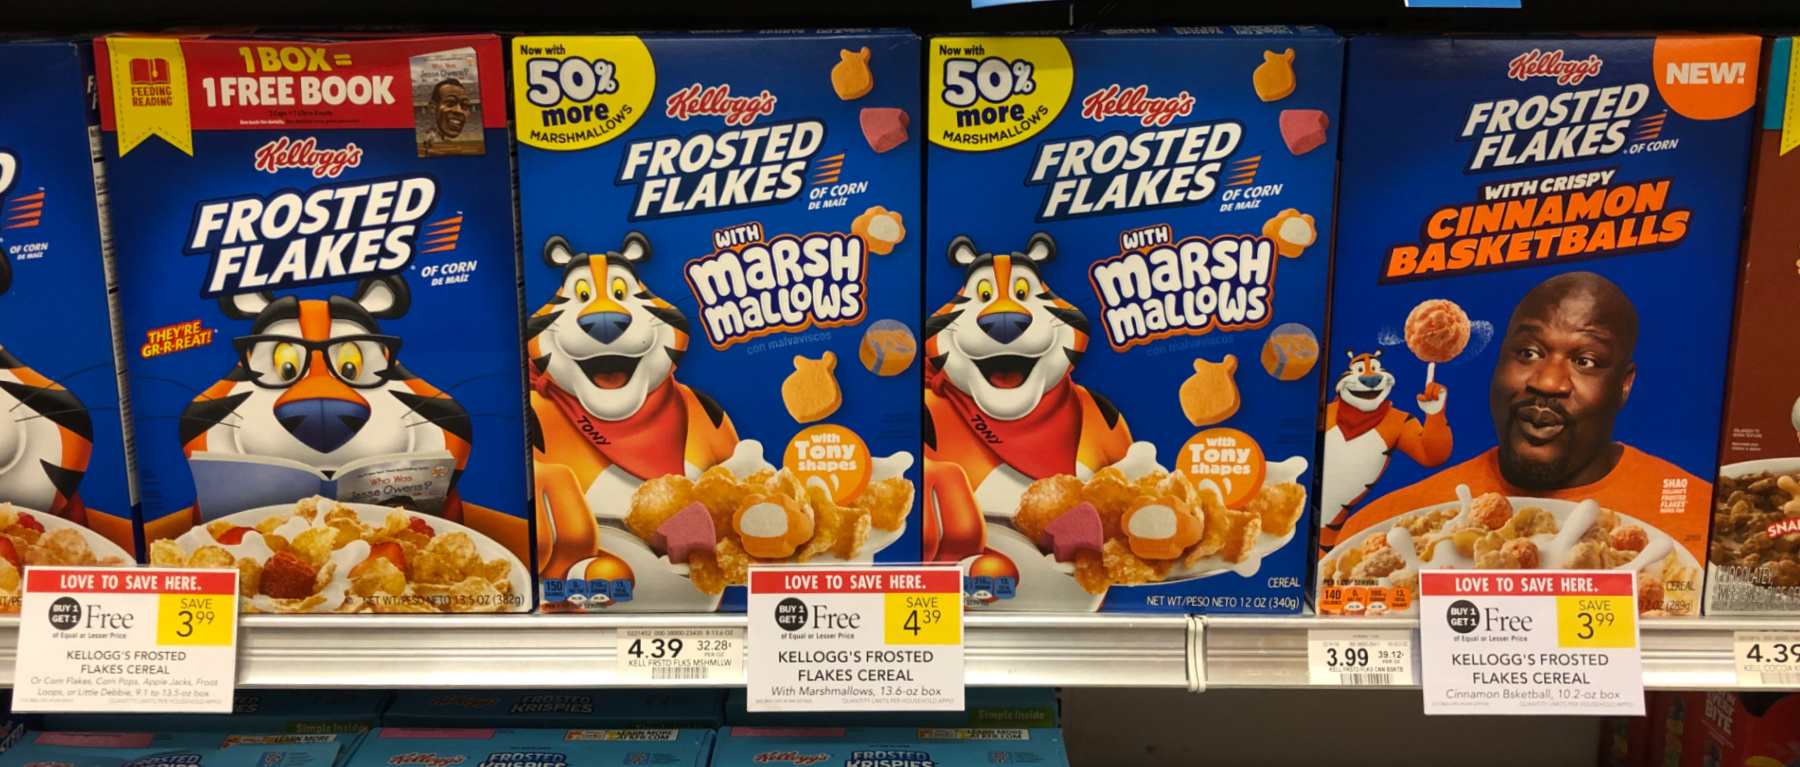 Grab A Great Deal On Kellogg's Frosted Flakes At Publix & Help Kids Play When You Support Mission Tiger on I Heart Publix